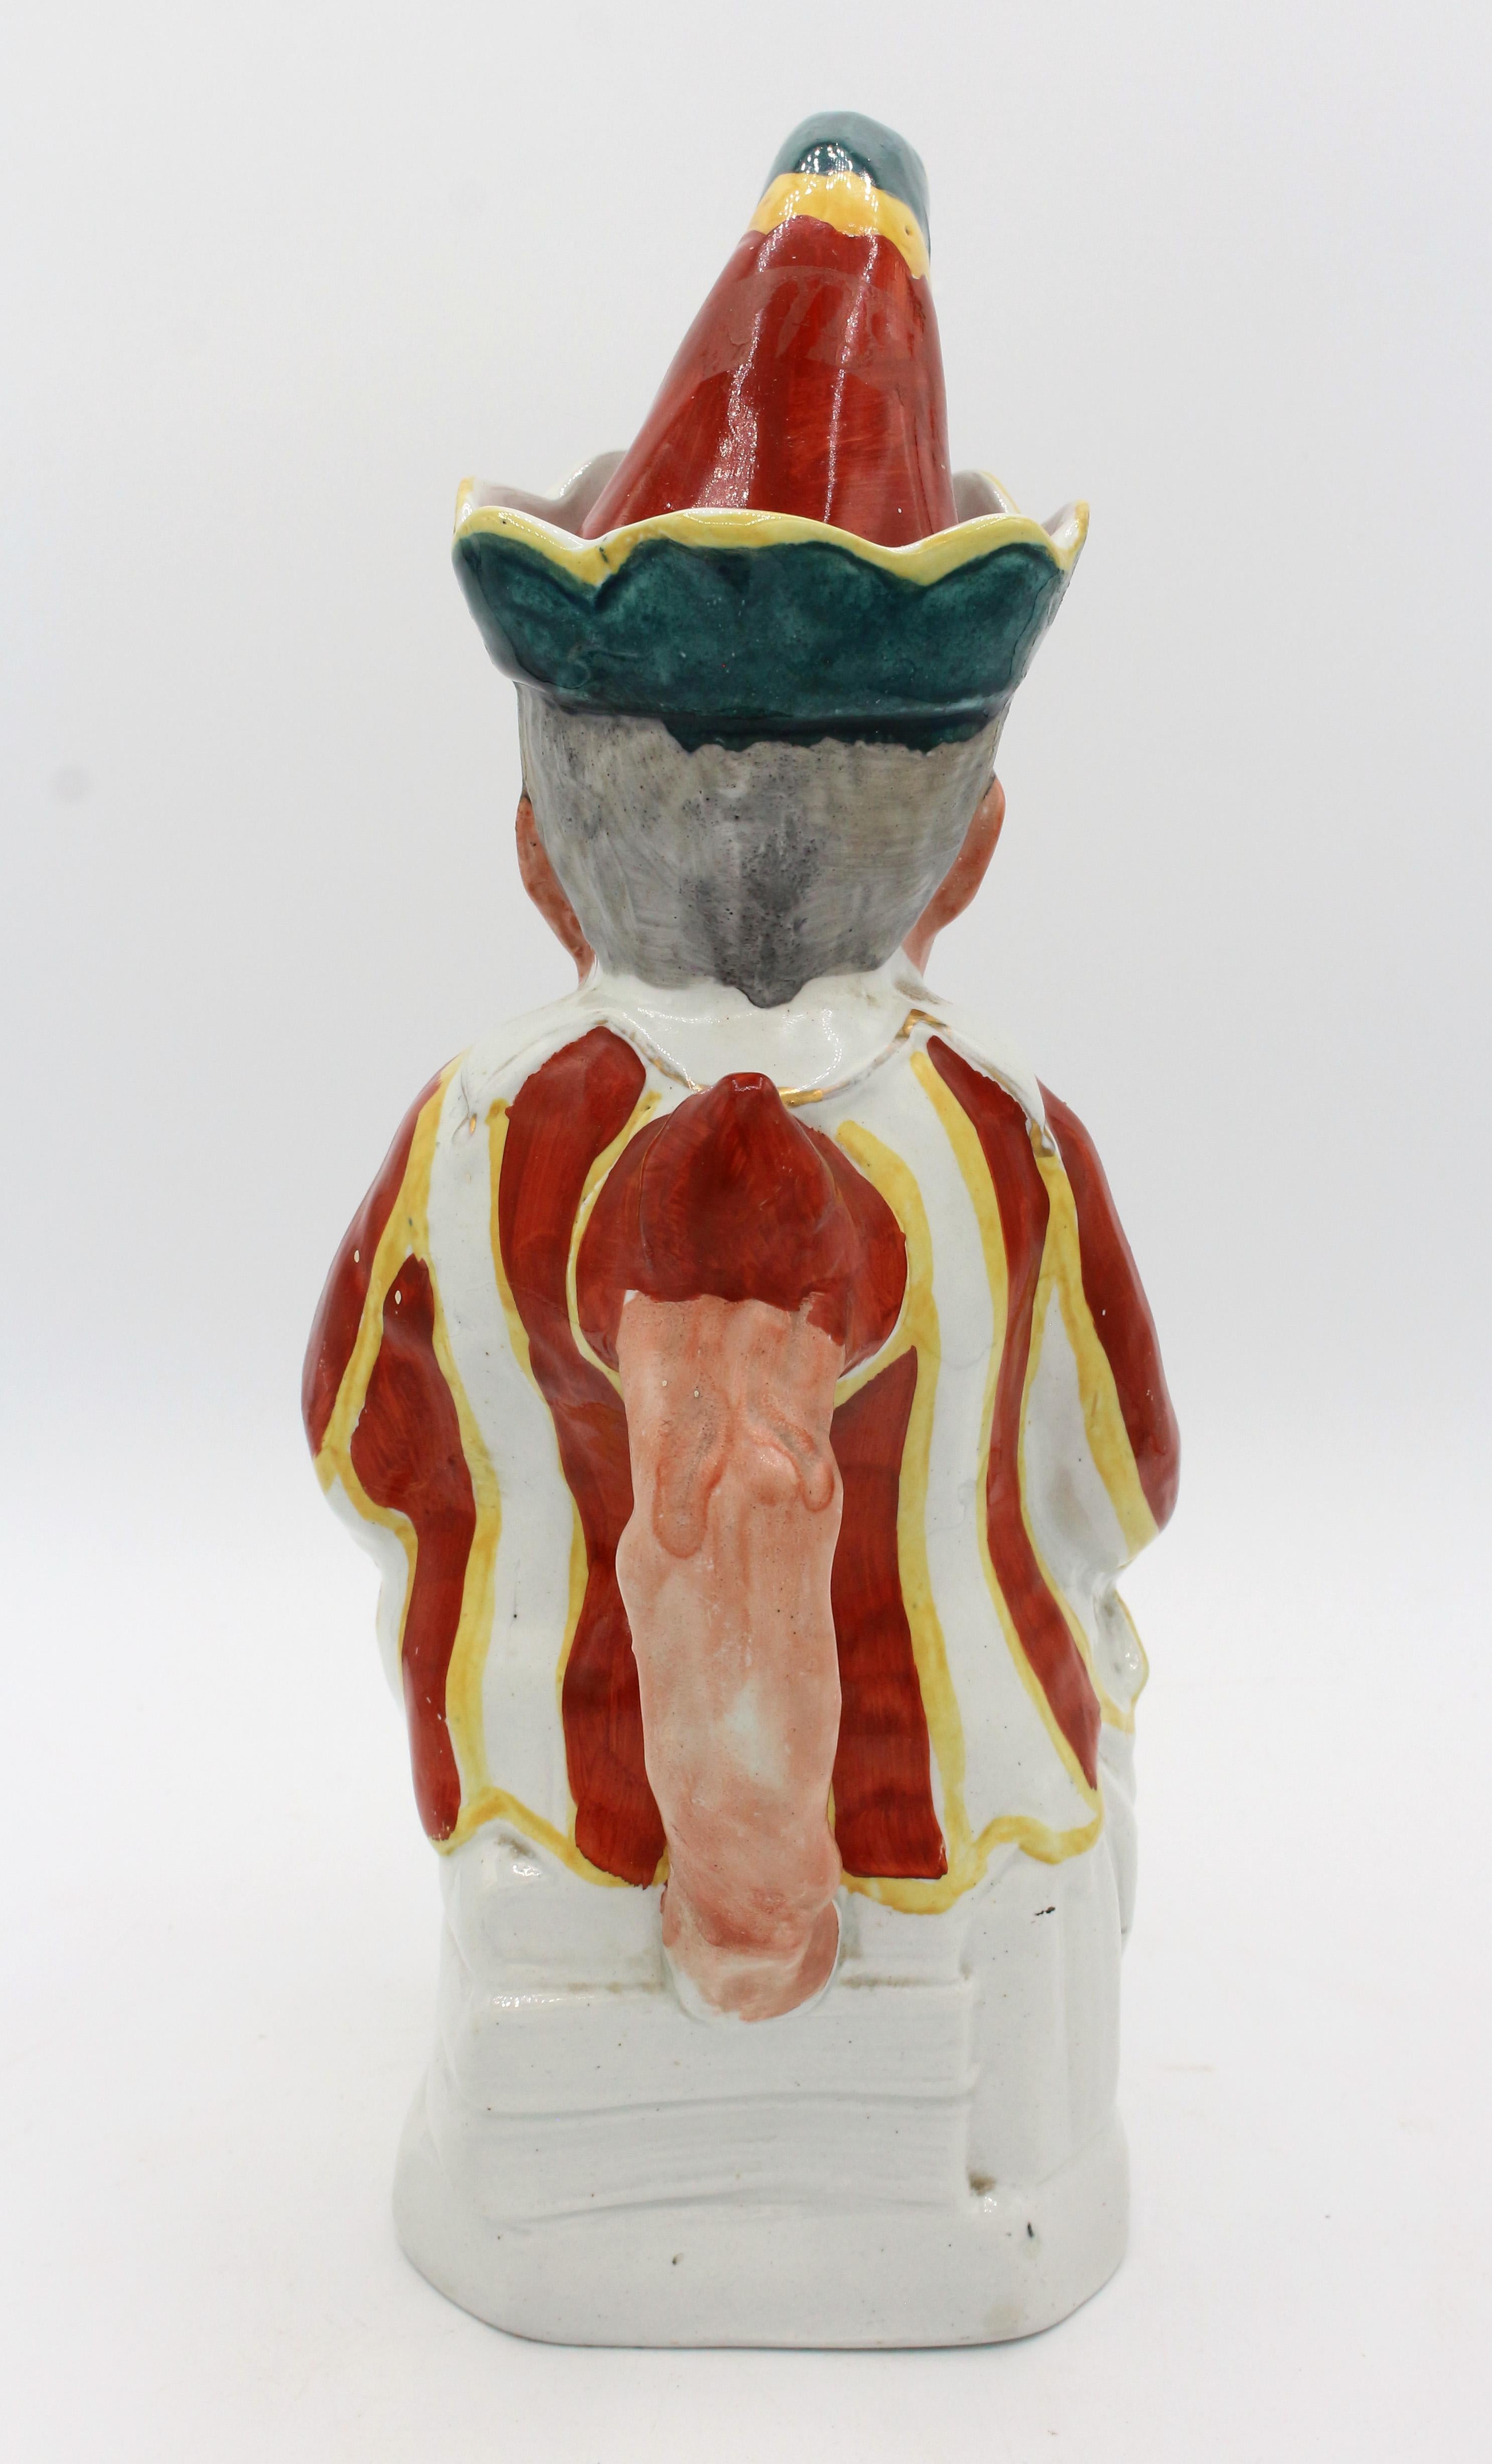 English Hilarious Punch figure Toby Jug by William Machin, England, 1889-1910 For Sale